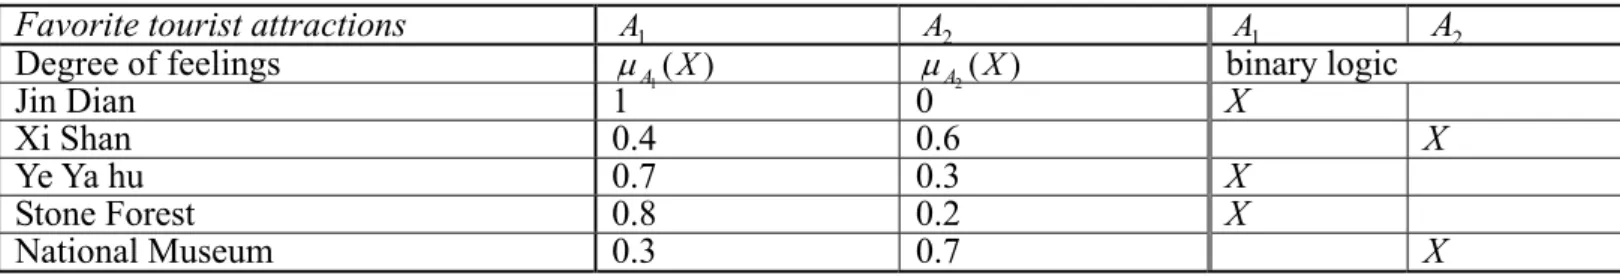 Table 3.1 Comparing fuzzy number with integral number favorite tourist attractions   